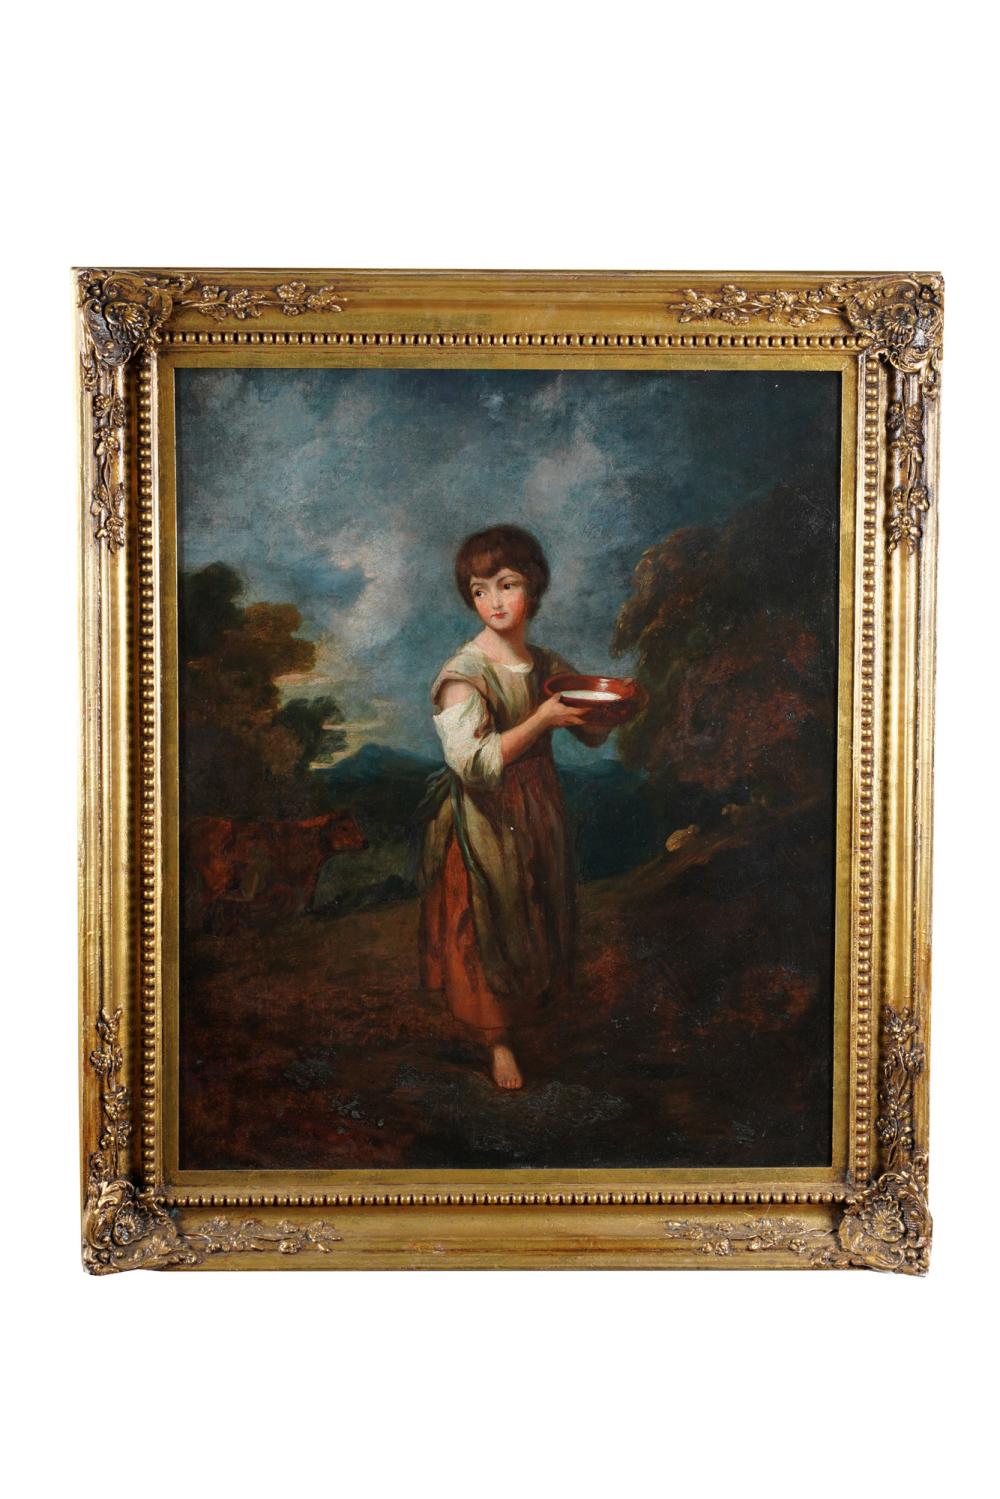 YOUNG GIRL WITH BOWLoil on canvas,